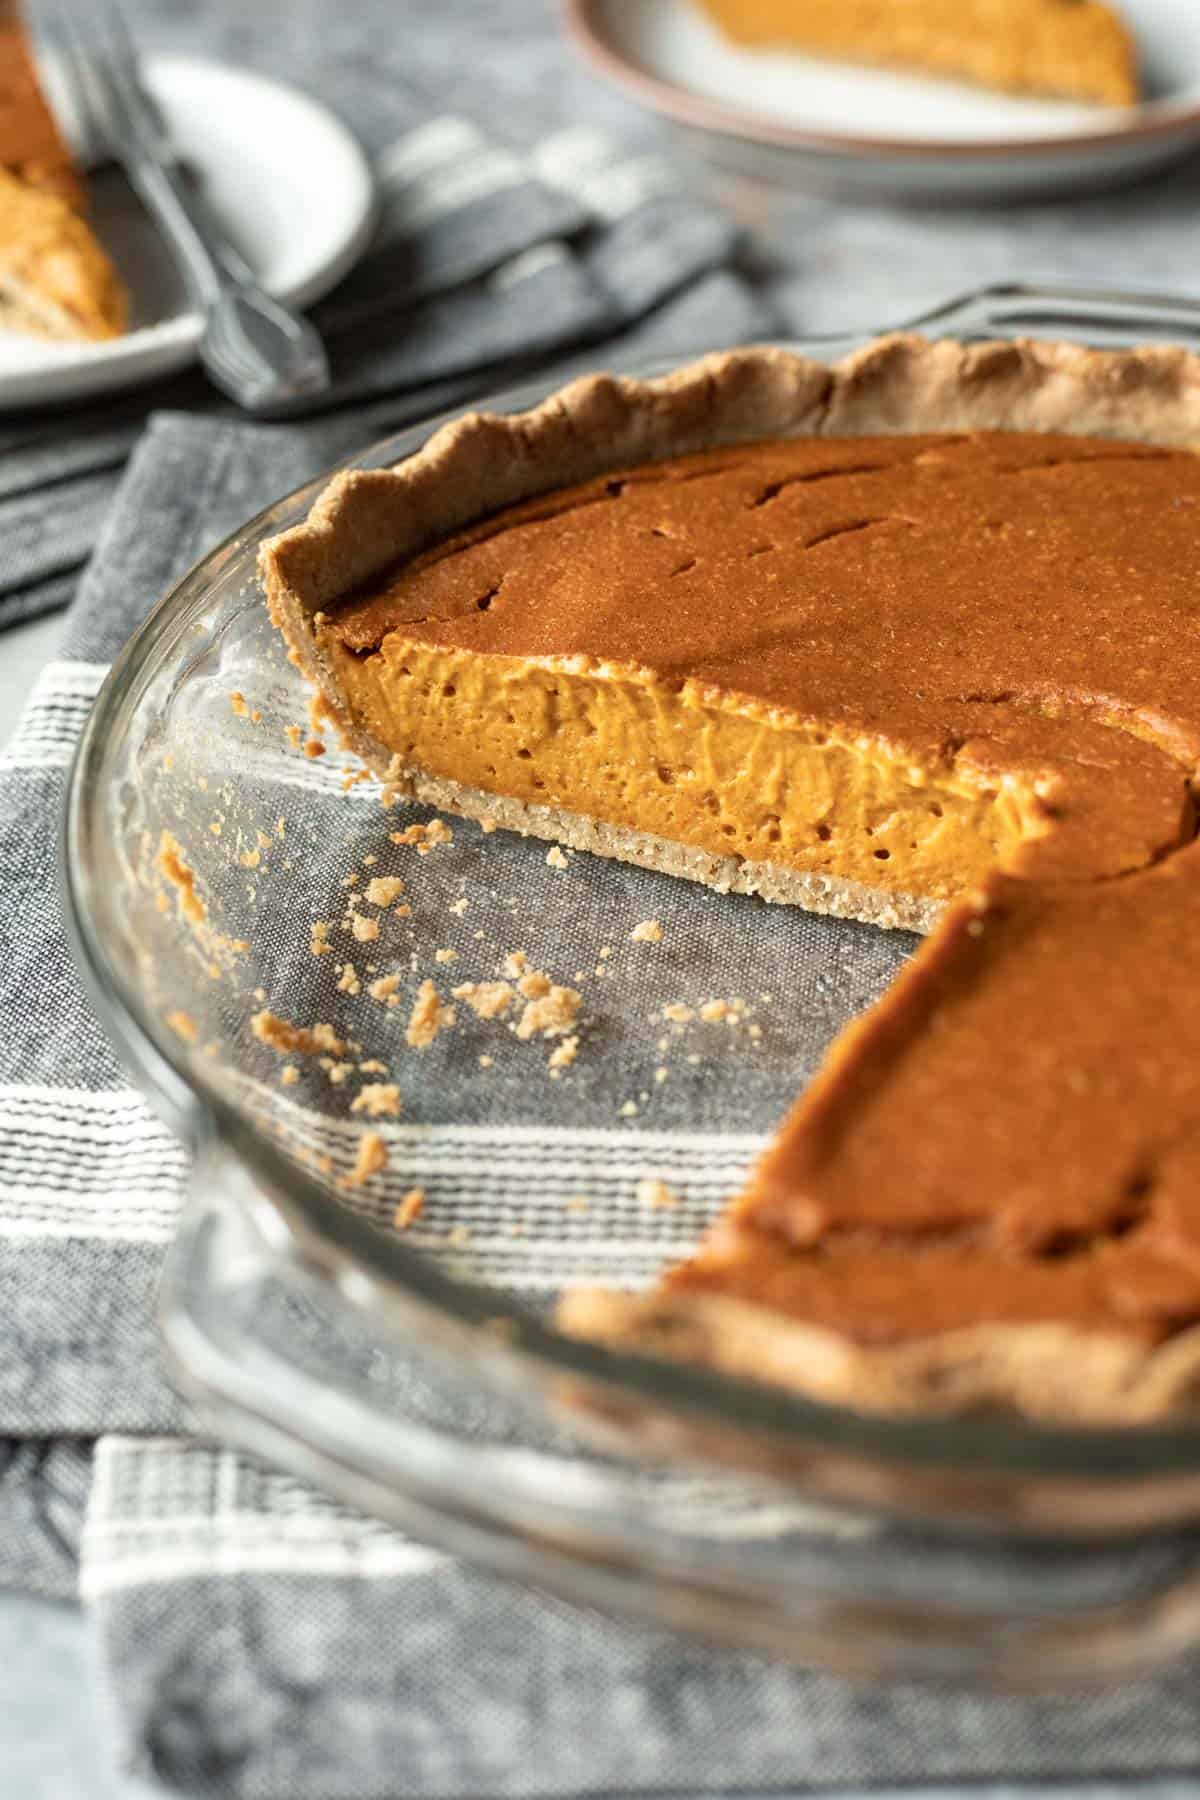 vegan pumpkin pie in pie plate with slices removed to show texture of the nut-free pie crust.